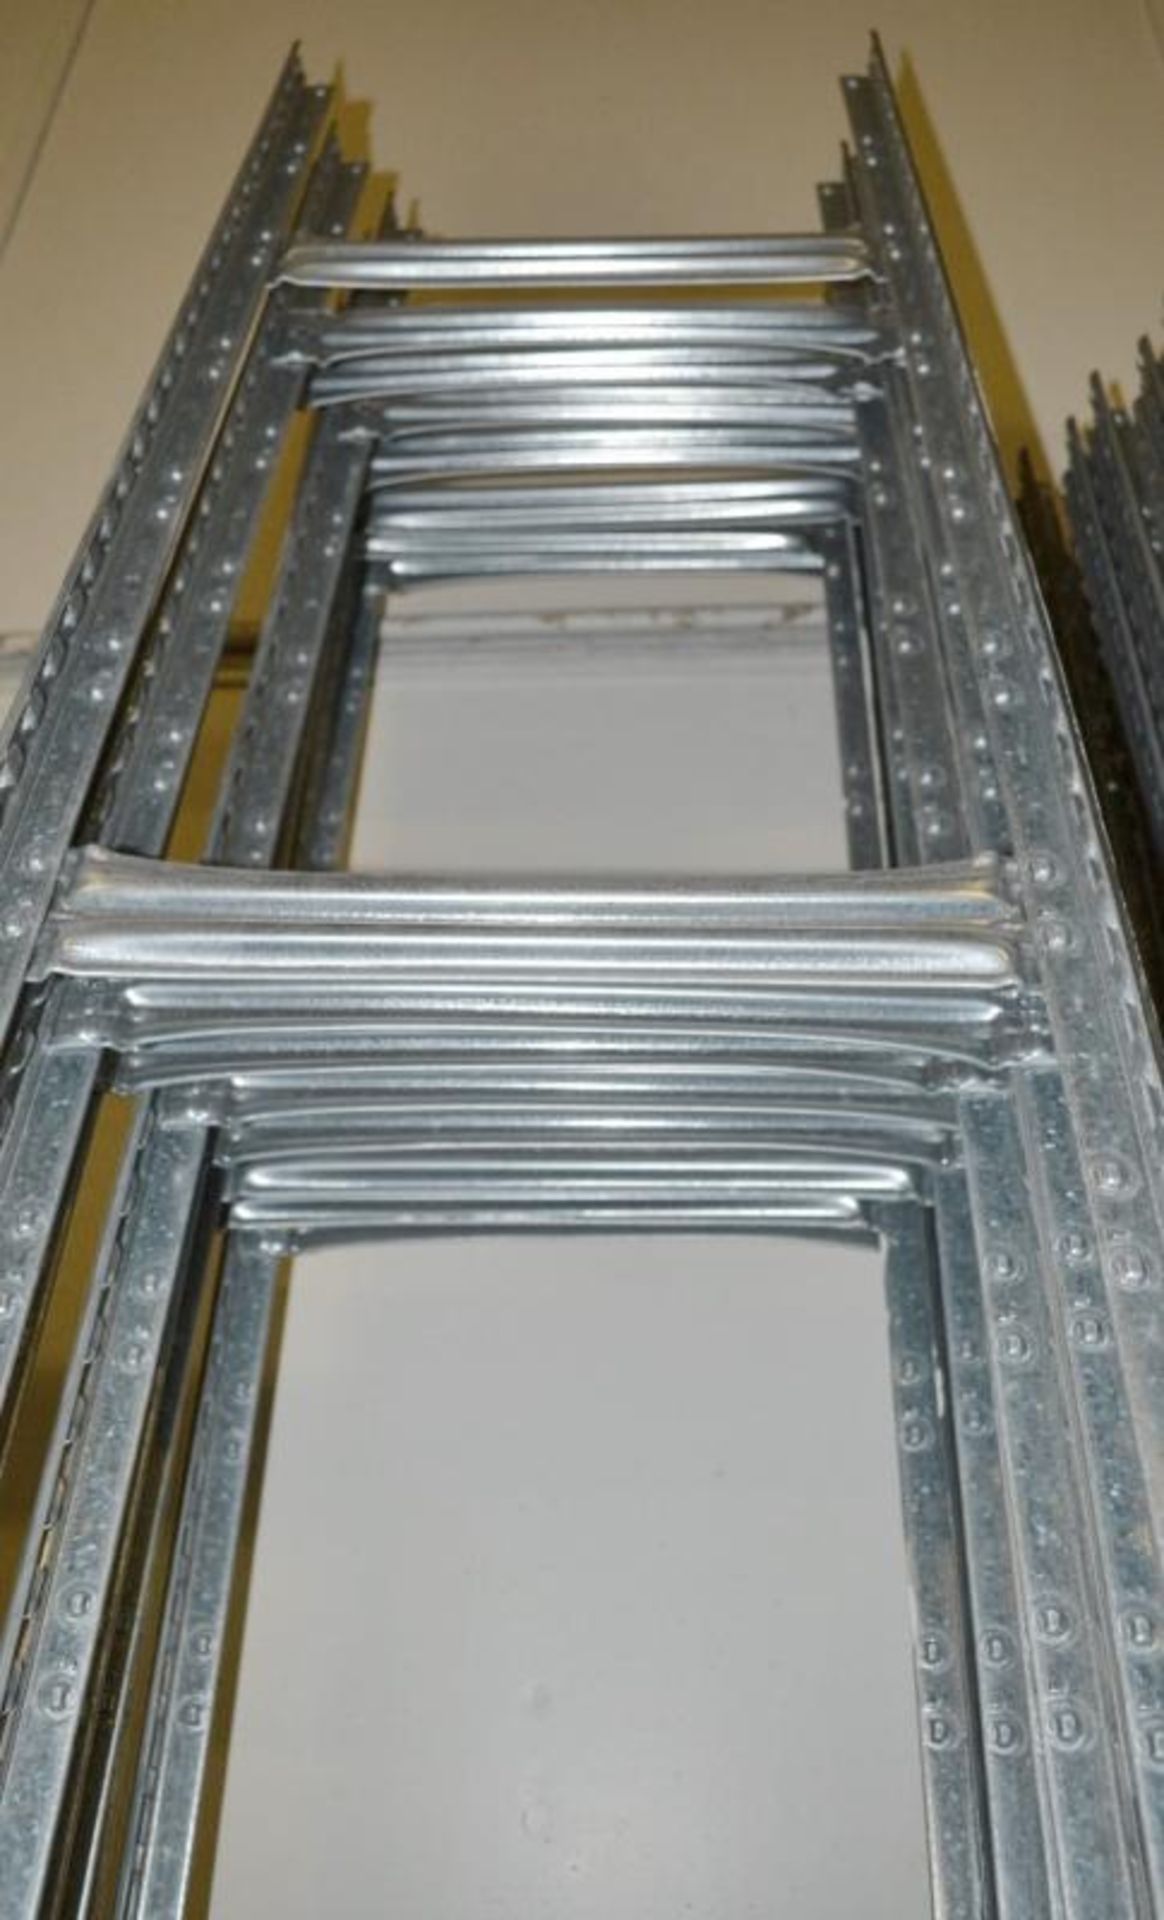 4 x Bays of Metalsistem Steel Modular Storage Shelving - Includes 65 Pieces - Recently Removed - Image 3 of 17